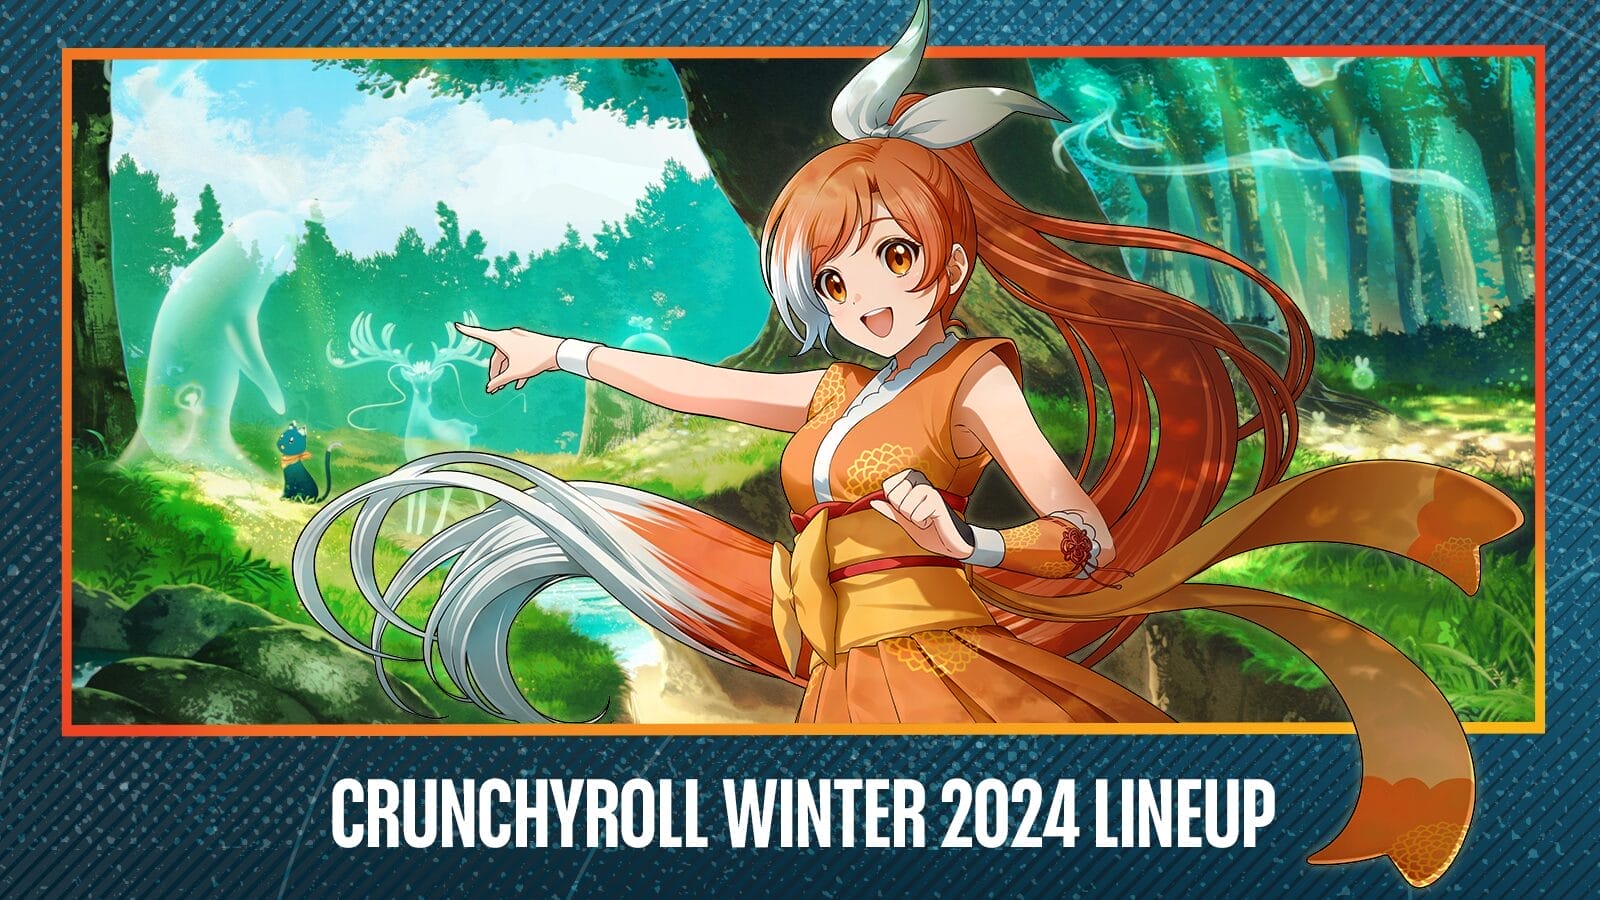 Crunchyroll have unveiled their latest anime lineup for 2024 and we